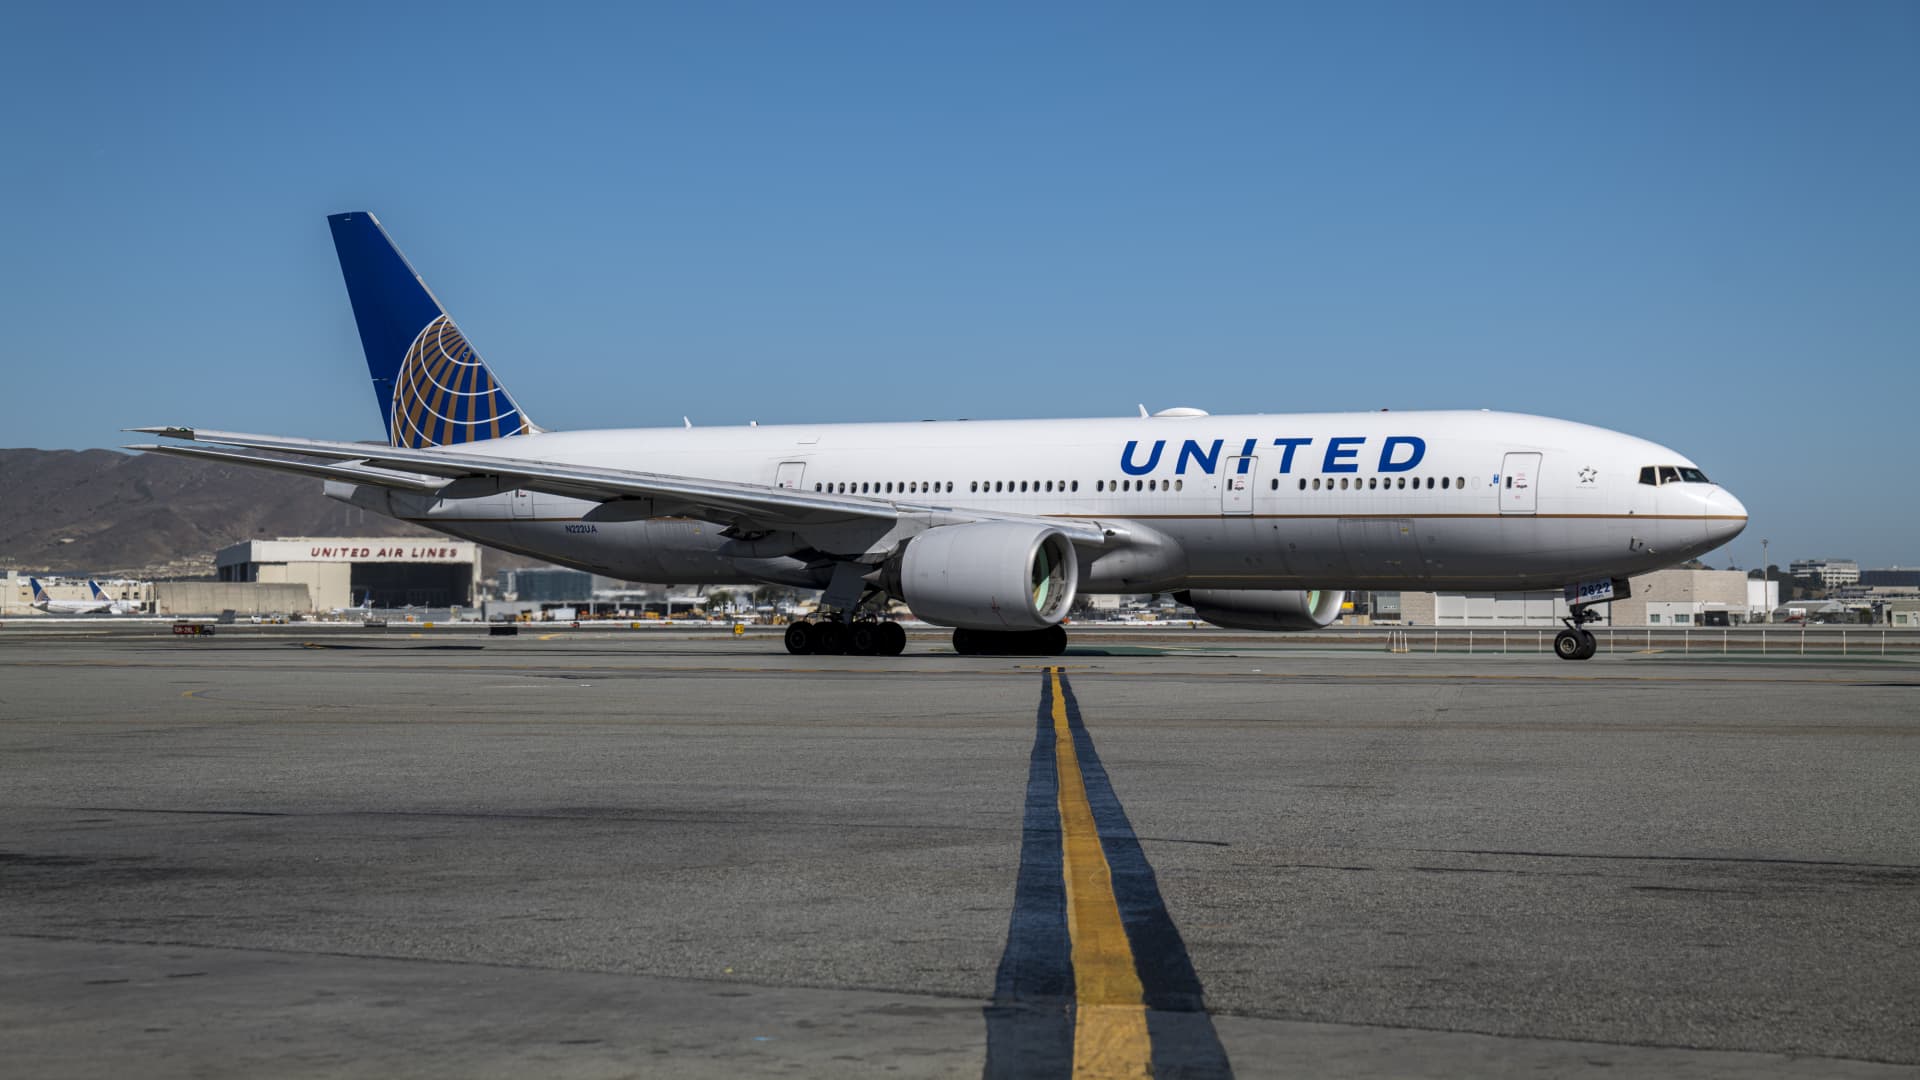 United Airlines says FAA has cleared 52 Boeing 777s to fly again after they were grounded for engine failure